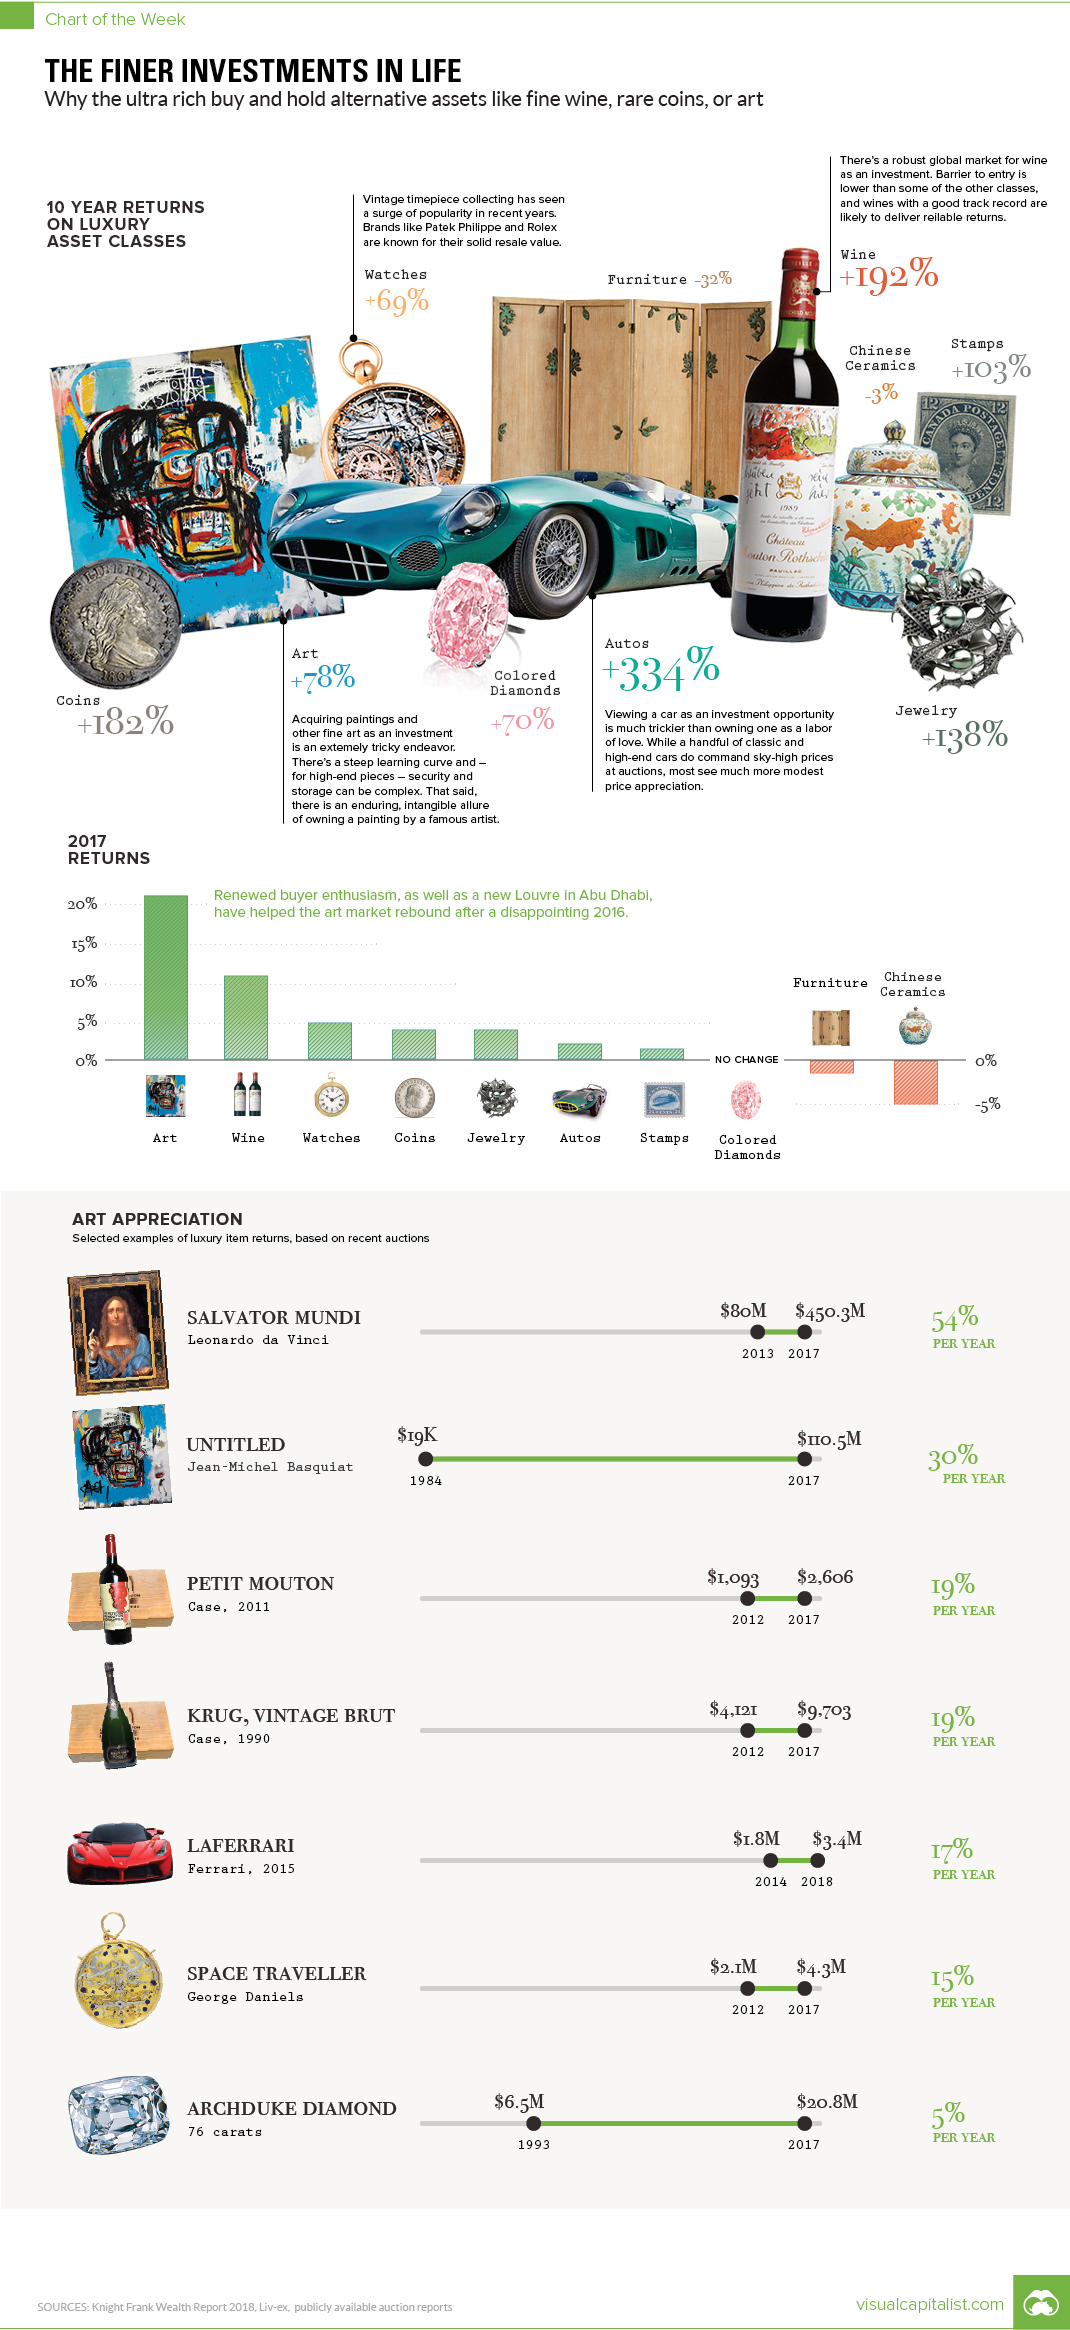 Chart: The Finer Investments in Life